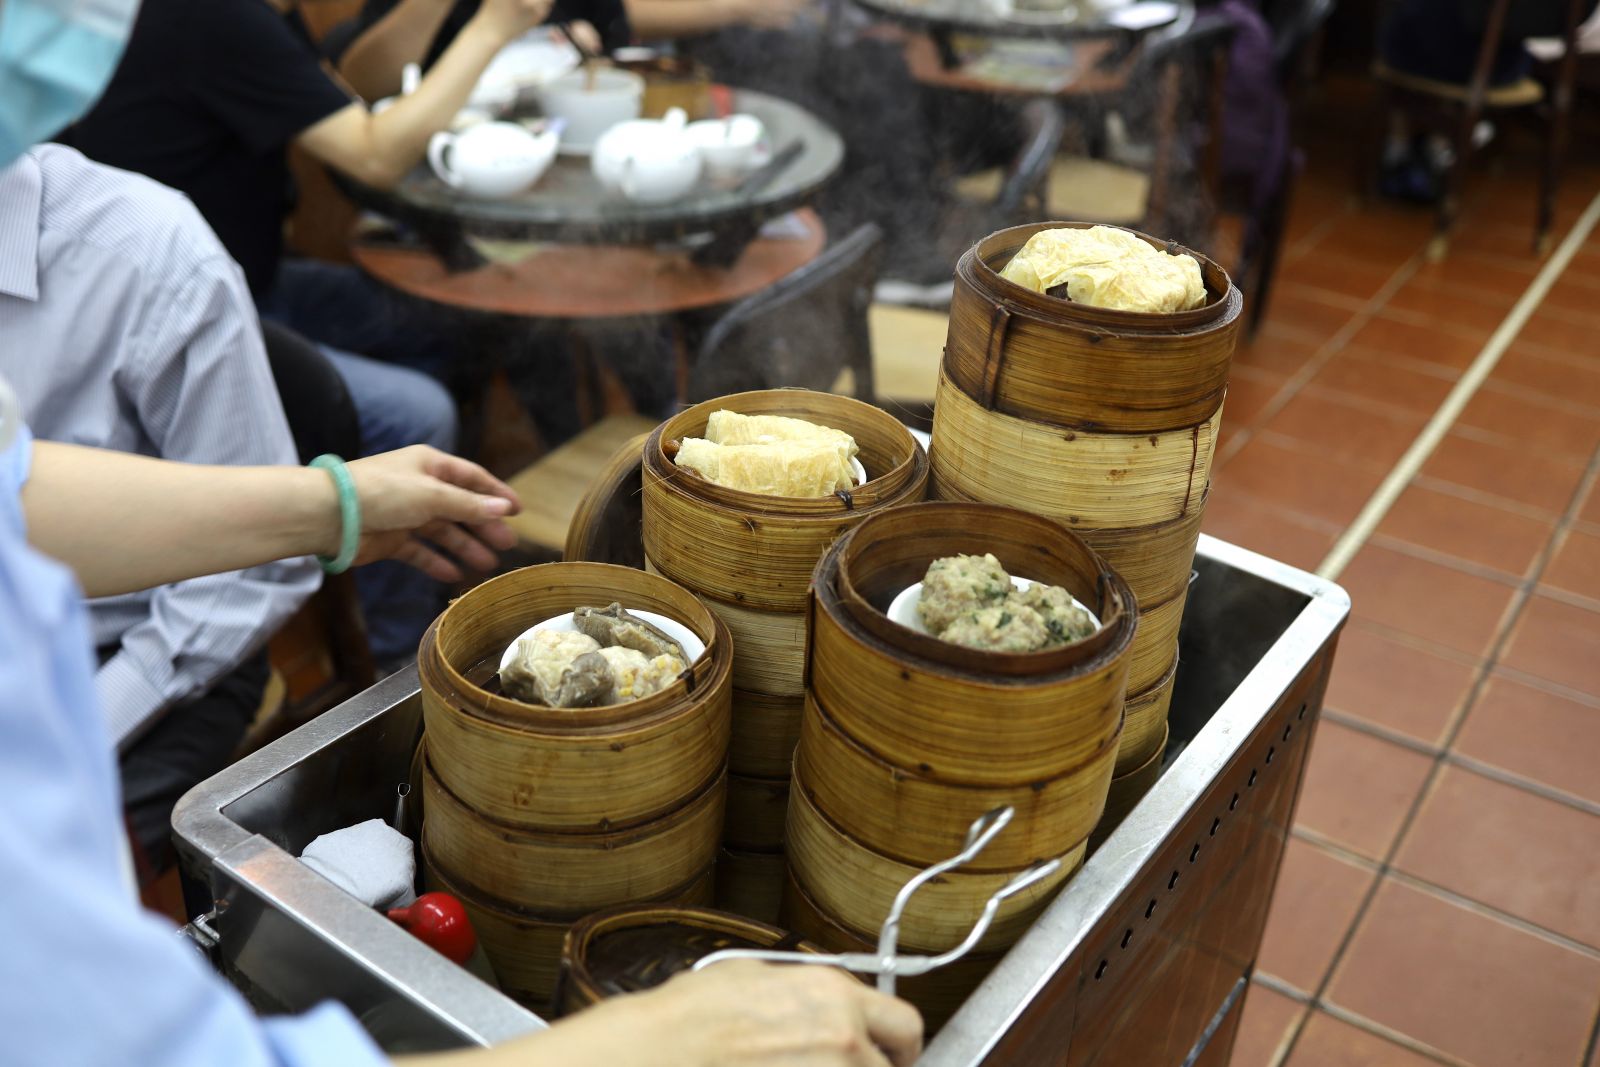 Dim Sum is one of the Hong Kong's signature cuisine